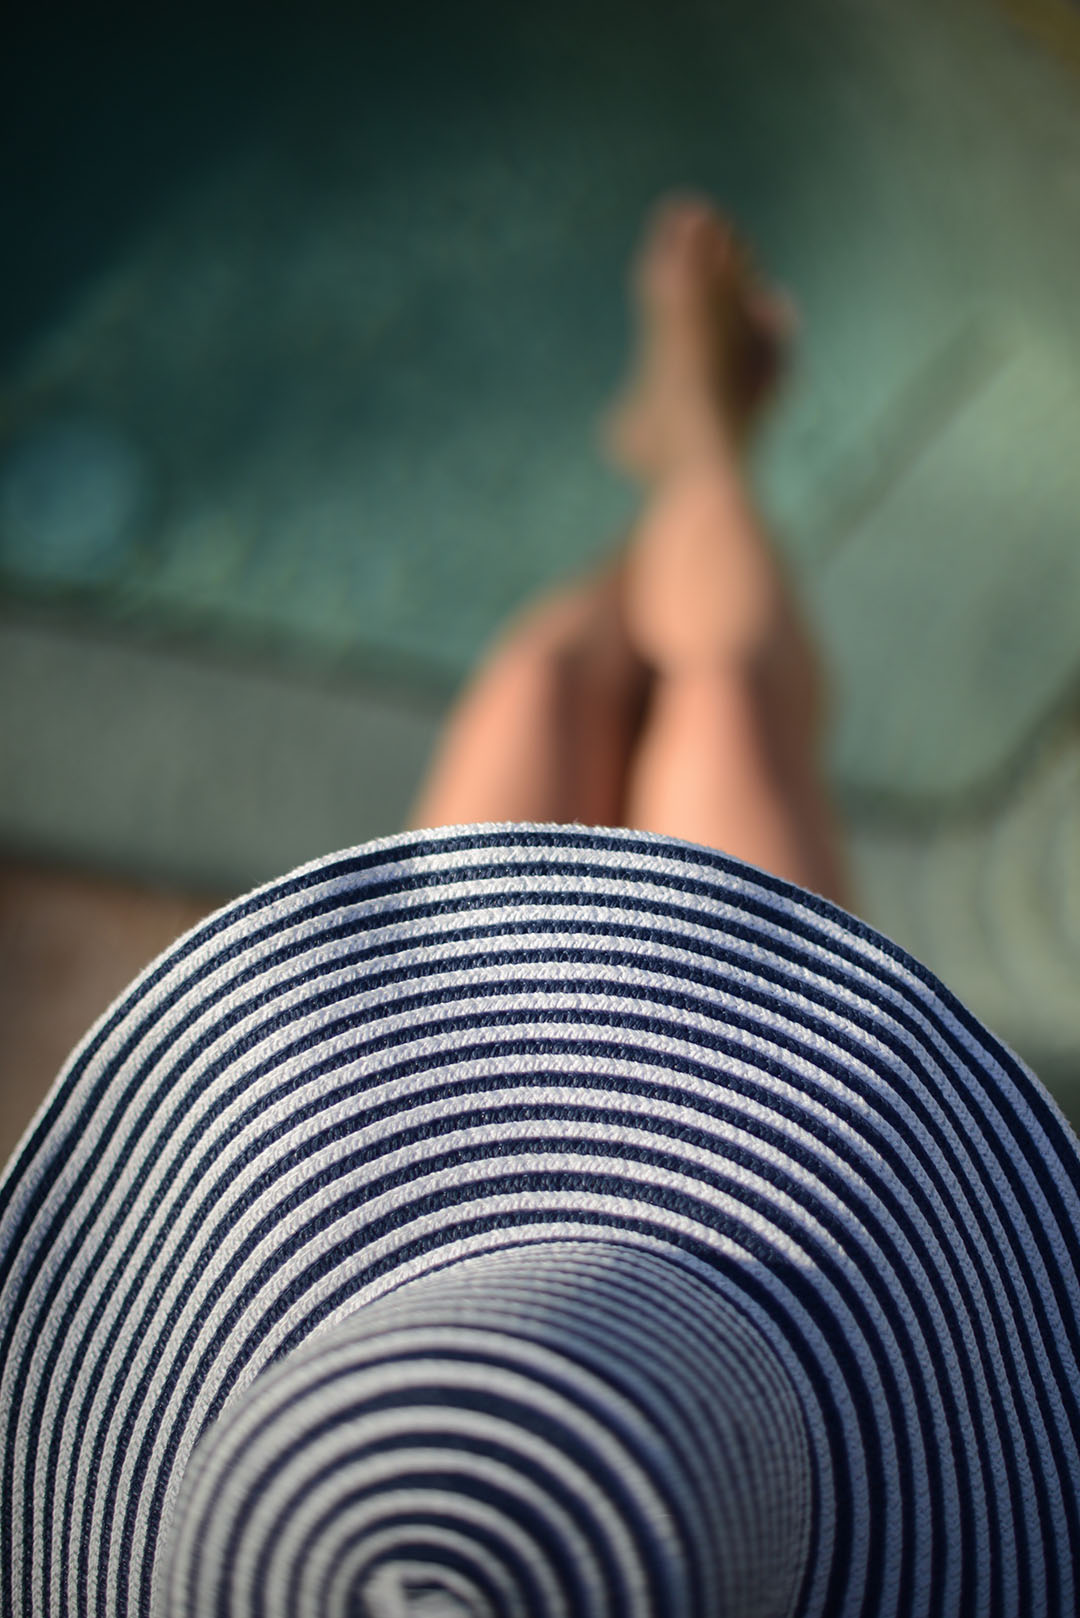 magid summer hat by the pool worn by emma rickwood photographed by sara delaney